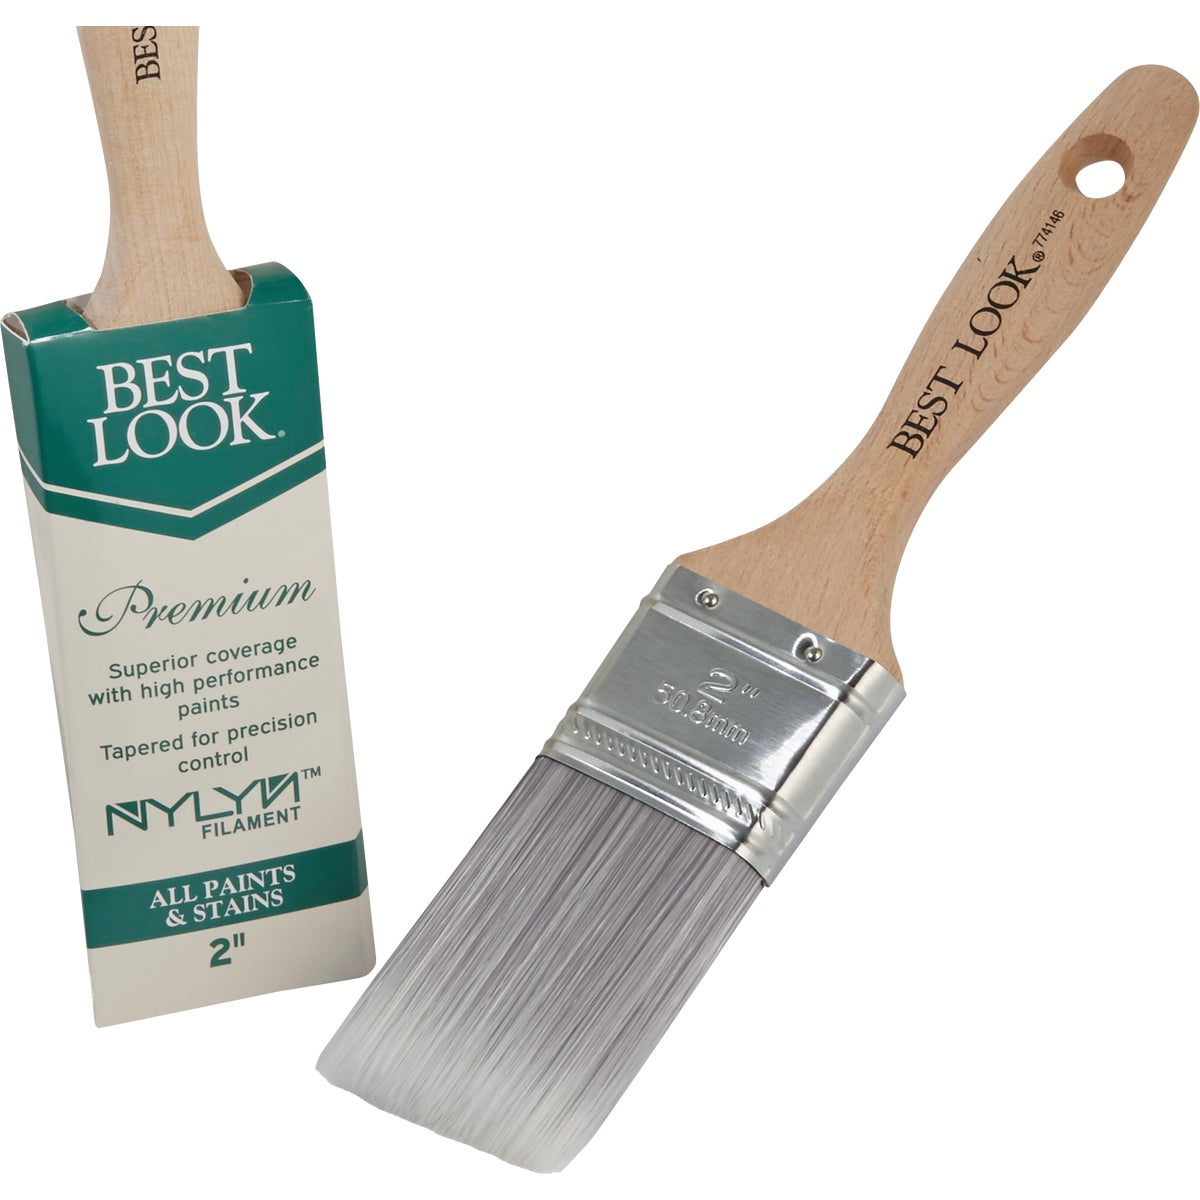 Item 774146, This professional quality paint brush will simplify any project.